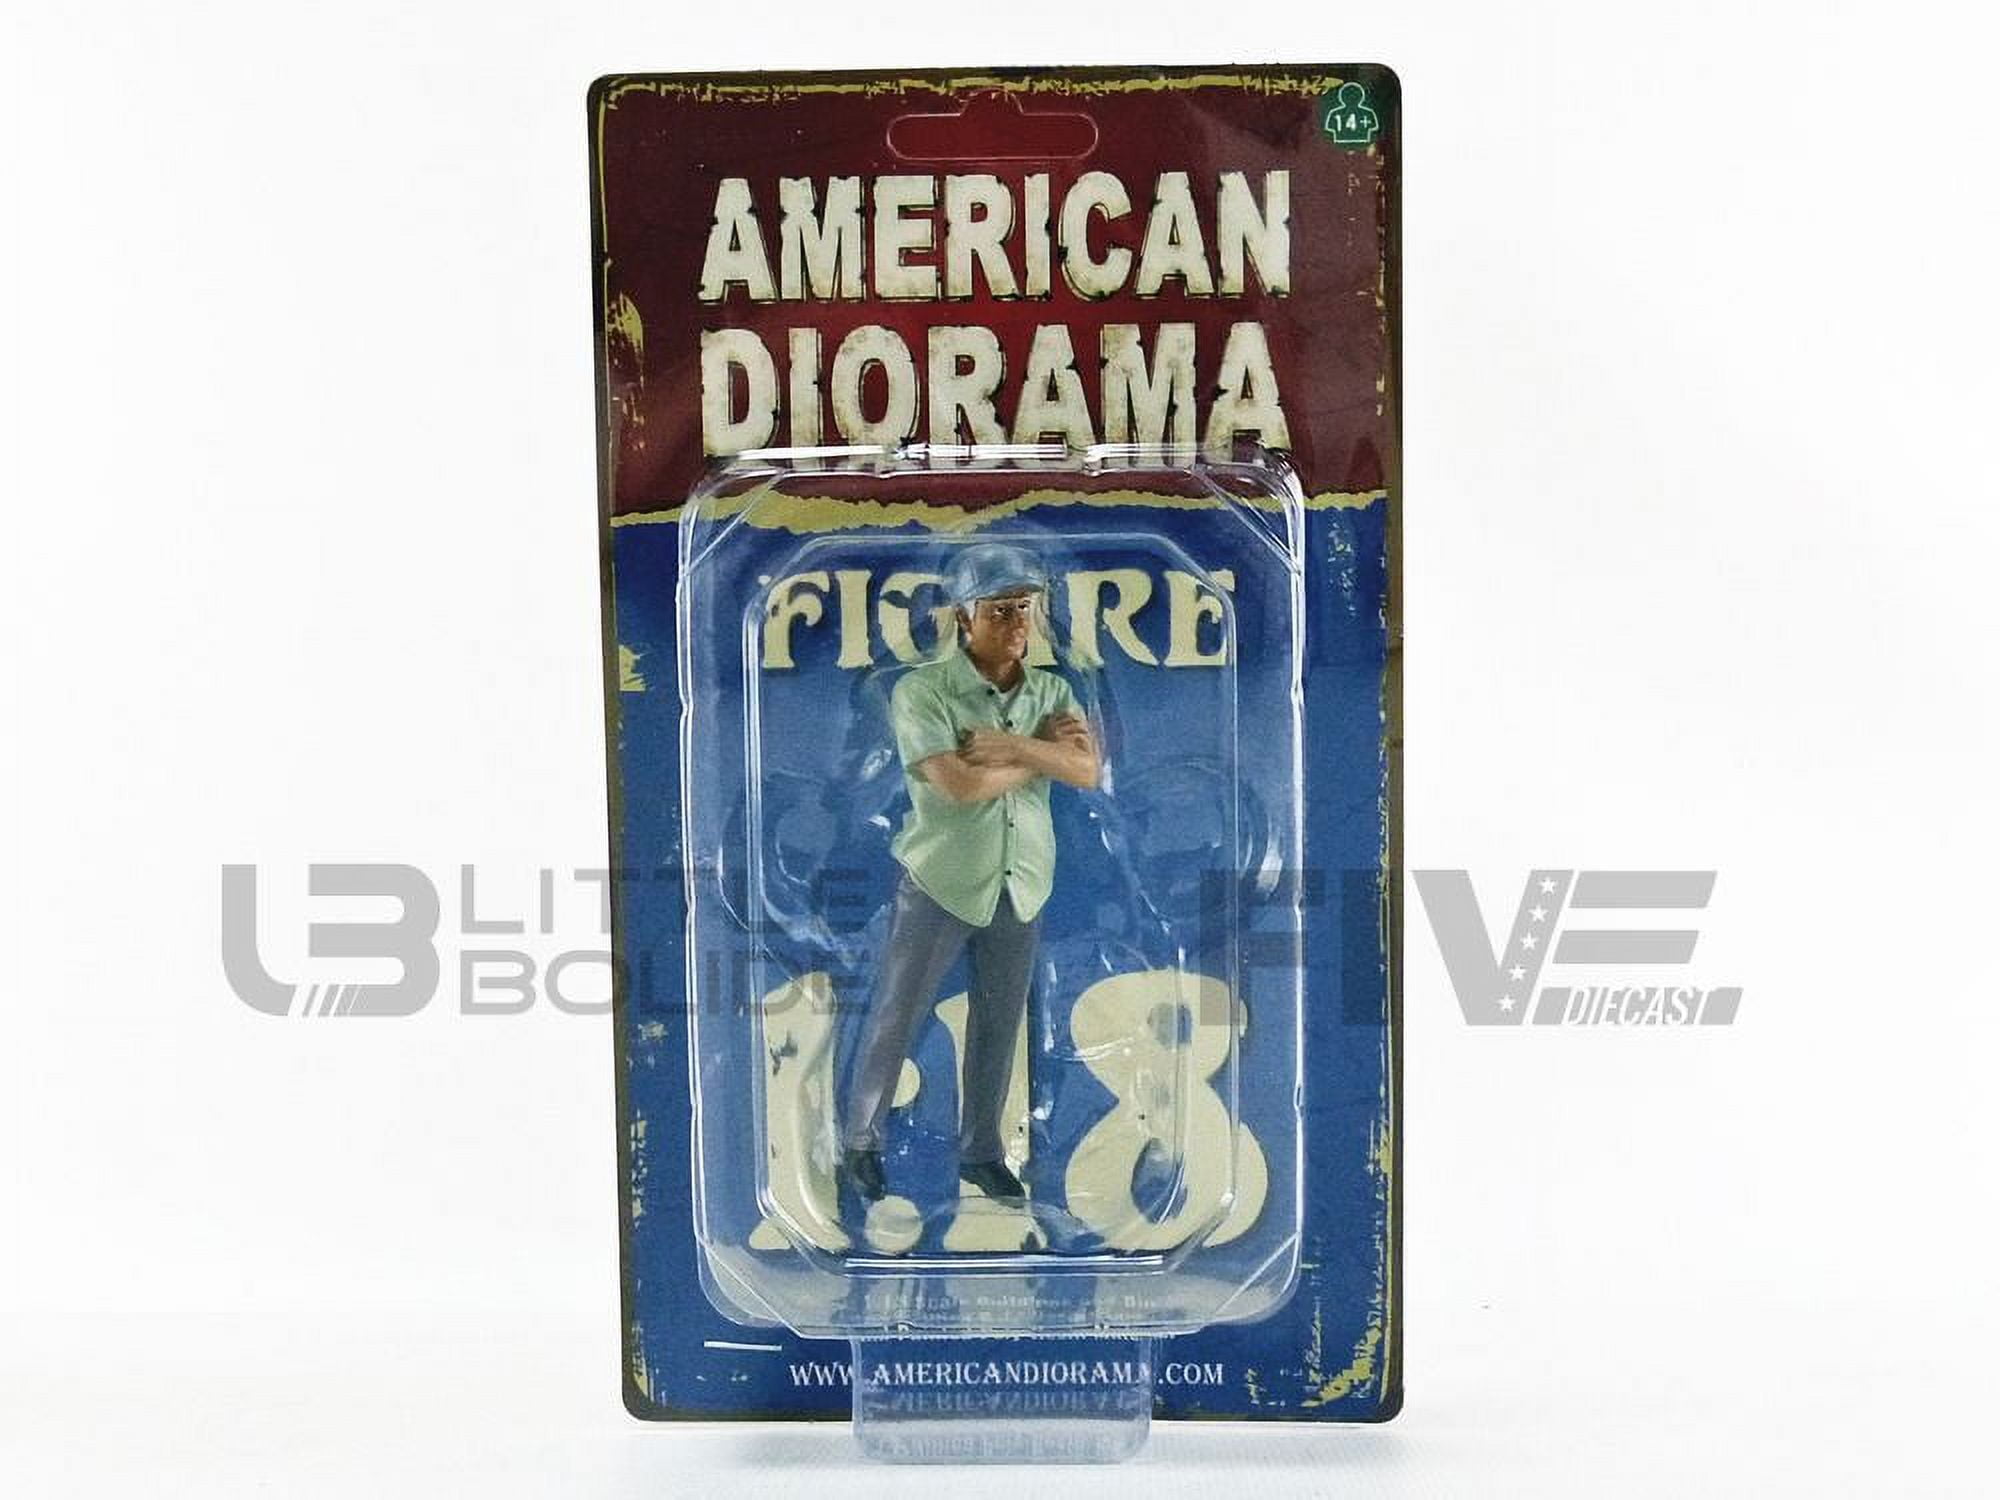 Picture of American Diorama 38210 Weekend Car Show Figurine II for 1 by 18 Scale Models